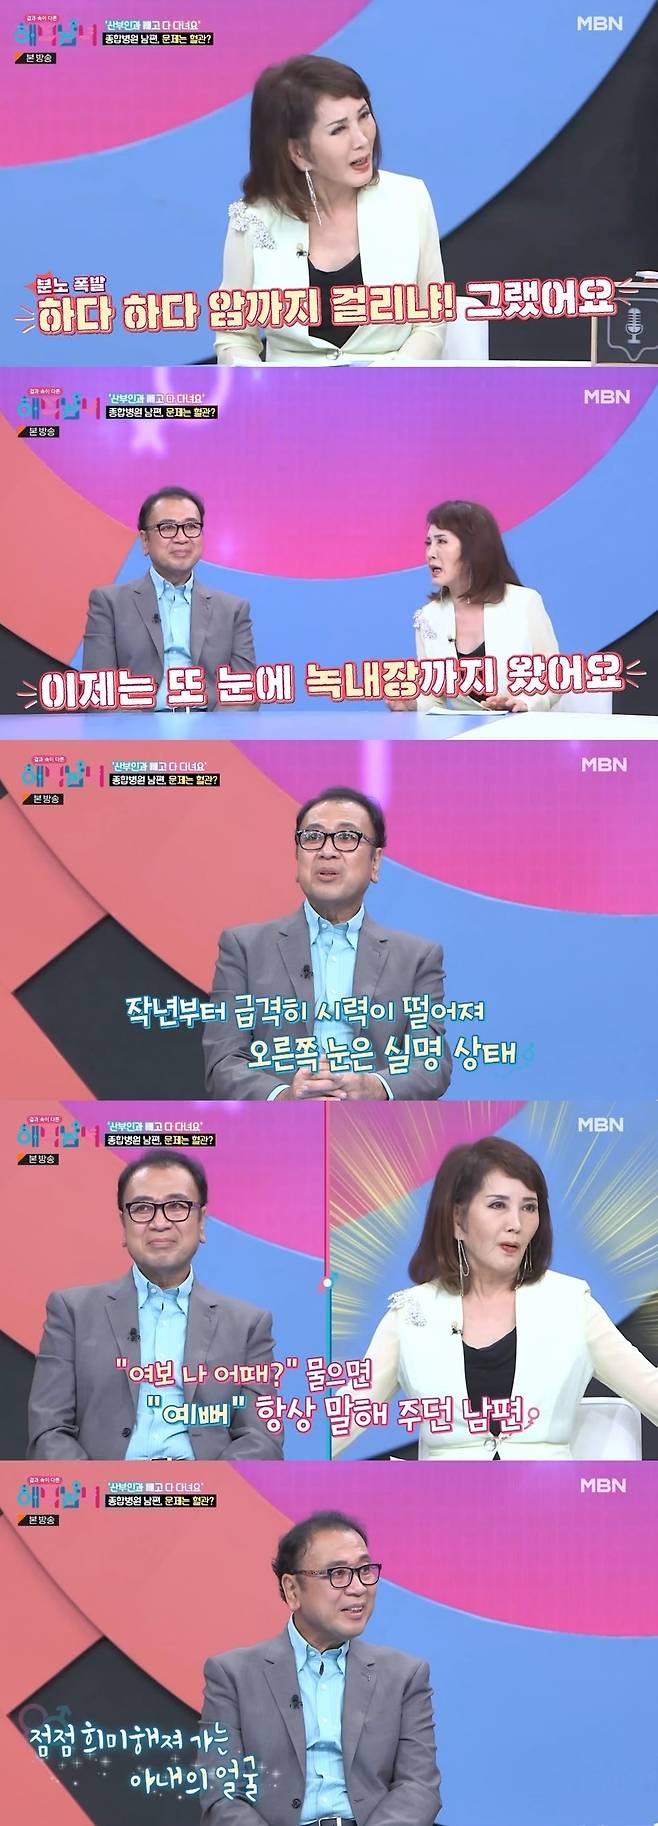 Actor Kim Min-jungs Husband Shin Dong-Il talked about his failing eyesight.MBN interpretive men and women with different apps broadcasted on November 16 featured actors Kim Min-jung and Husband Shin Dong-Il.On the day of the broadcast, Shin Dong-Il said he had a stand-up operation to widen blood vessels at the time of myocardial infarction and recurred again in A Year Ago in Winter.In response, Kim Min-jung said, Everyone goes except obstetricians and gynecologists. Gout has been around since I was in my 20s. I came to glaucoma in my eyes, but I missed the time for treatment.Shin Dong-Il said, The gout medicine was fatal to glaucoma. If I didnt take the medicine, my body wouldnt move. I took care of it, but it got worse from A Year Ago in Winter. My right side became blind.What I see now is the brightest thing. Tomorrow will be darker than today. Im upset to see my wife like that, but Im seeing it with my minds eye, he continued.